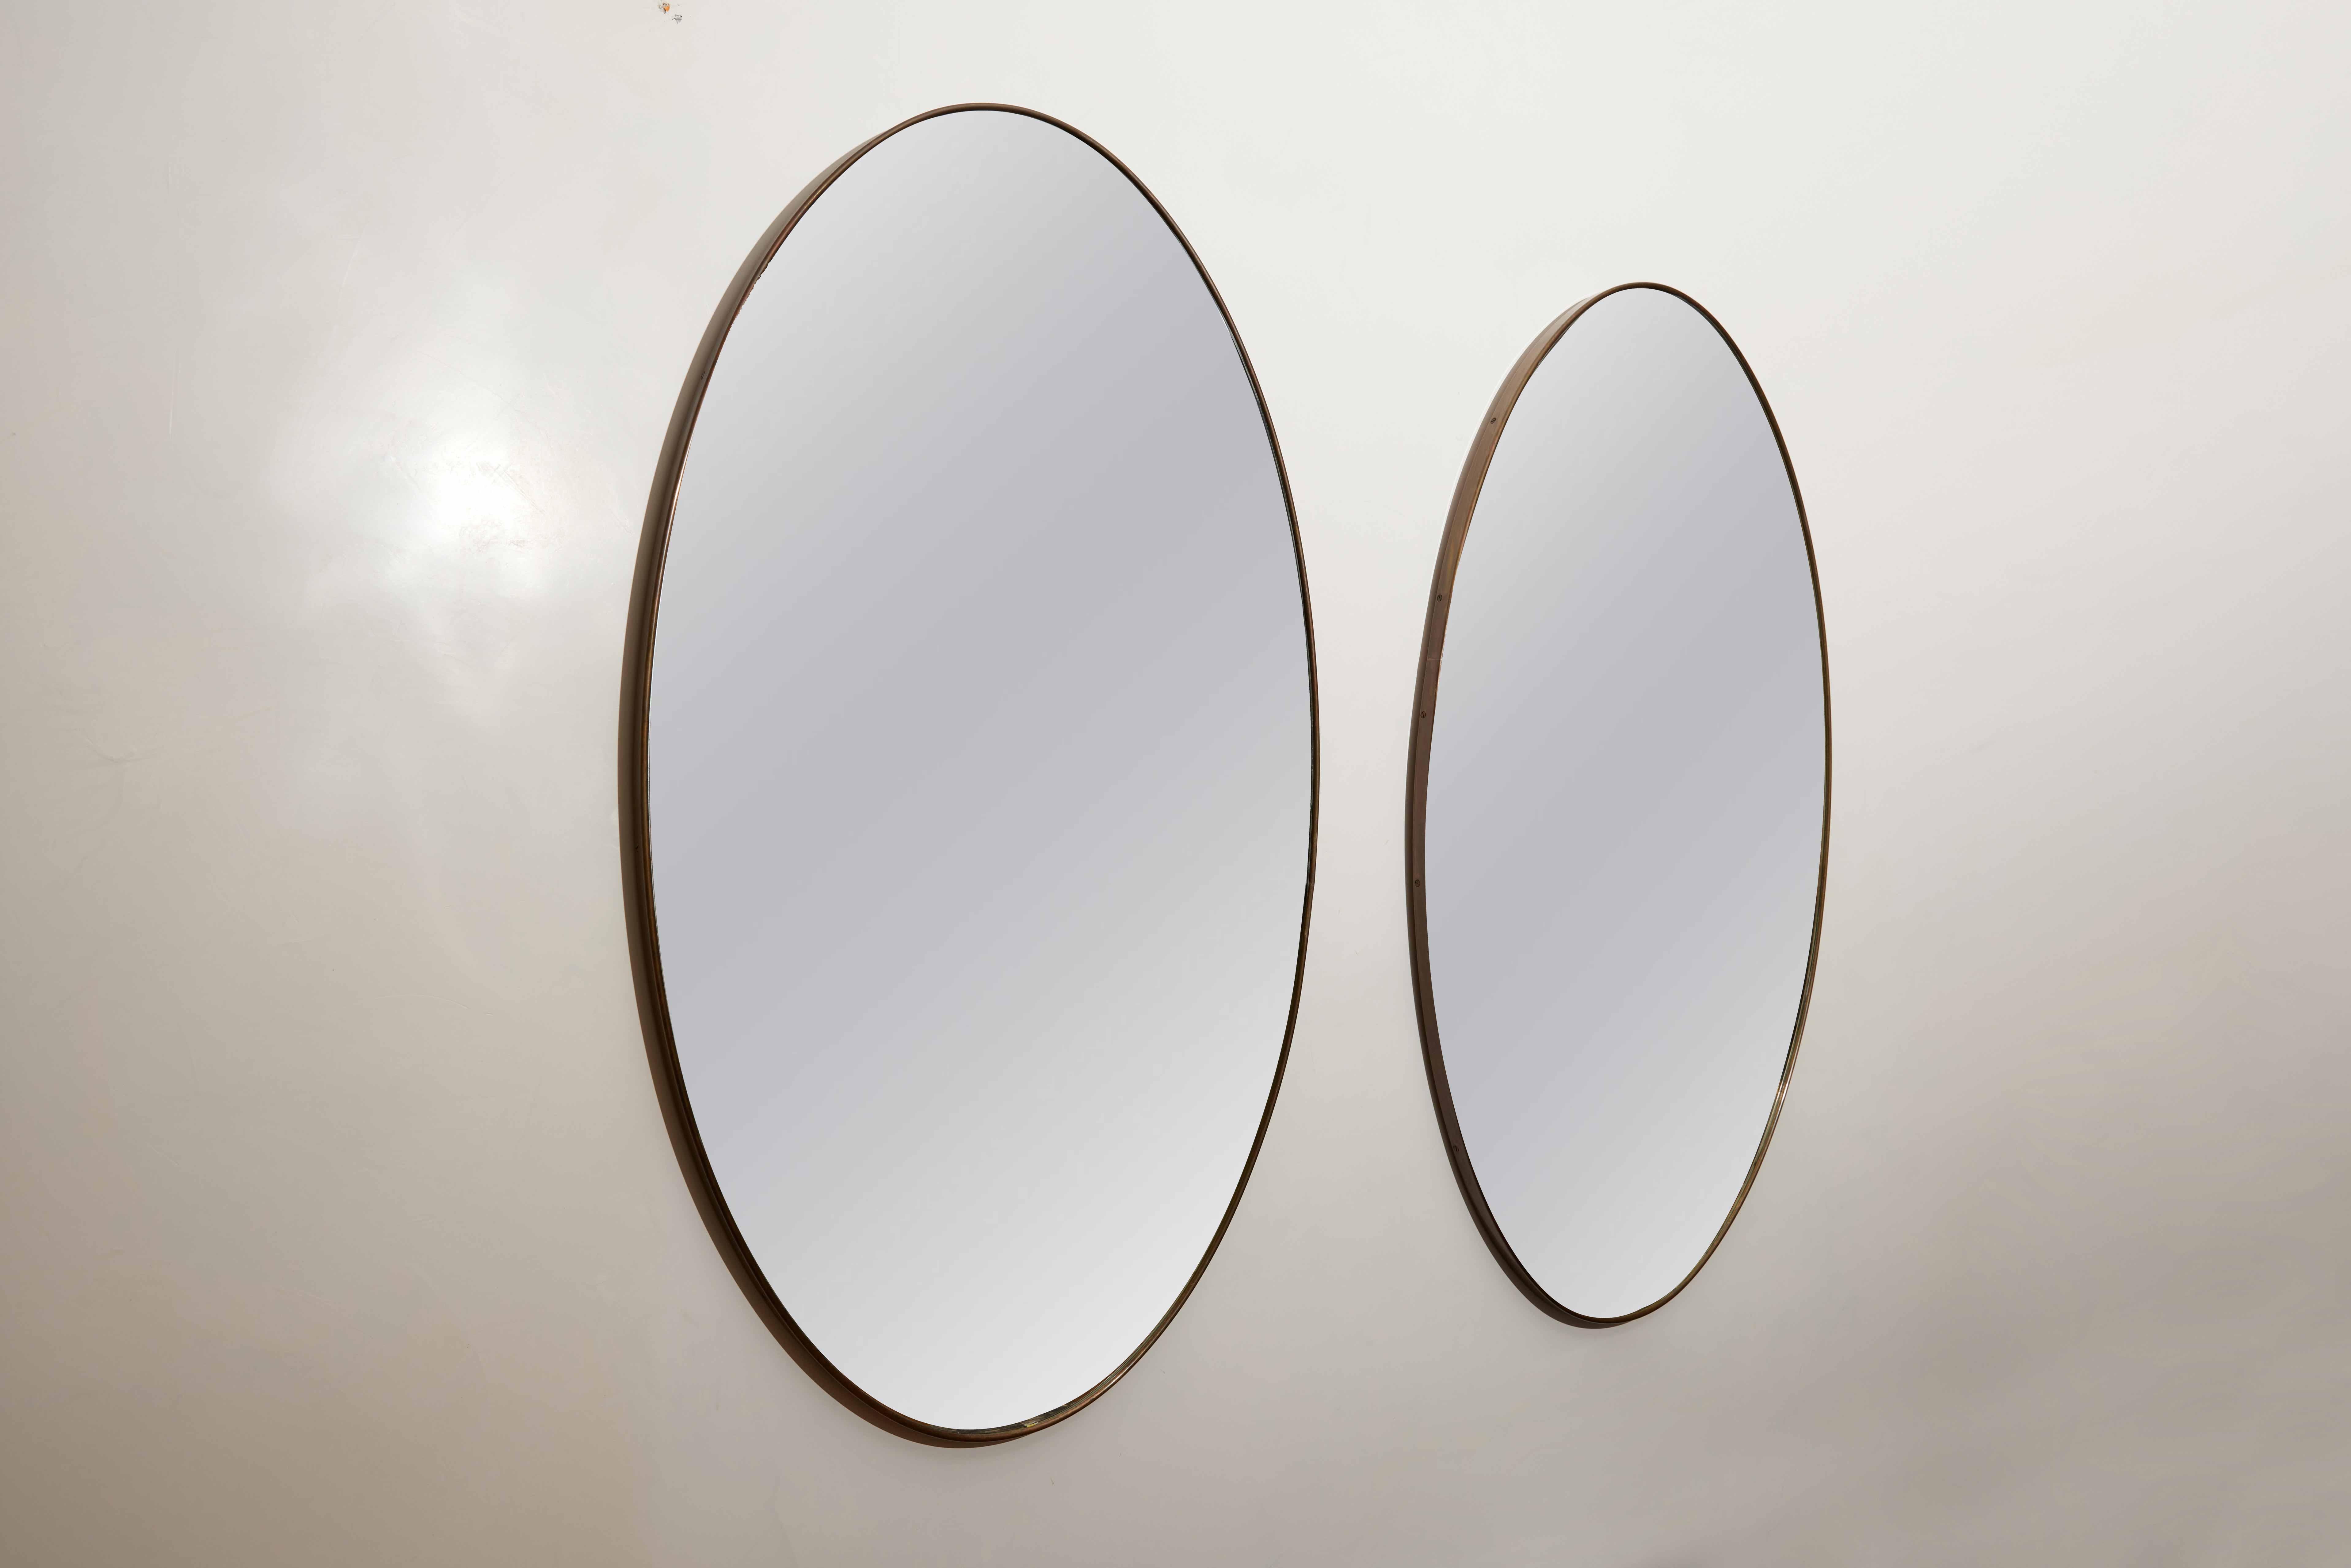 Pair of Italian Modernist Brass Oval Wall Mirrors, Italy, circa 1950

This pair of Italian Modernist oval brass mirrors offers a grand scale that brings both light and depth to any interior space. Crafted in Italy around the 1950s, these mirrors are